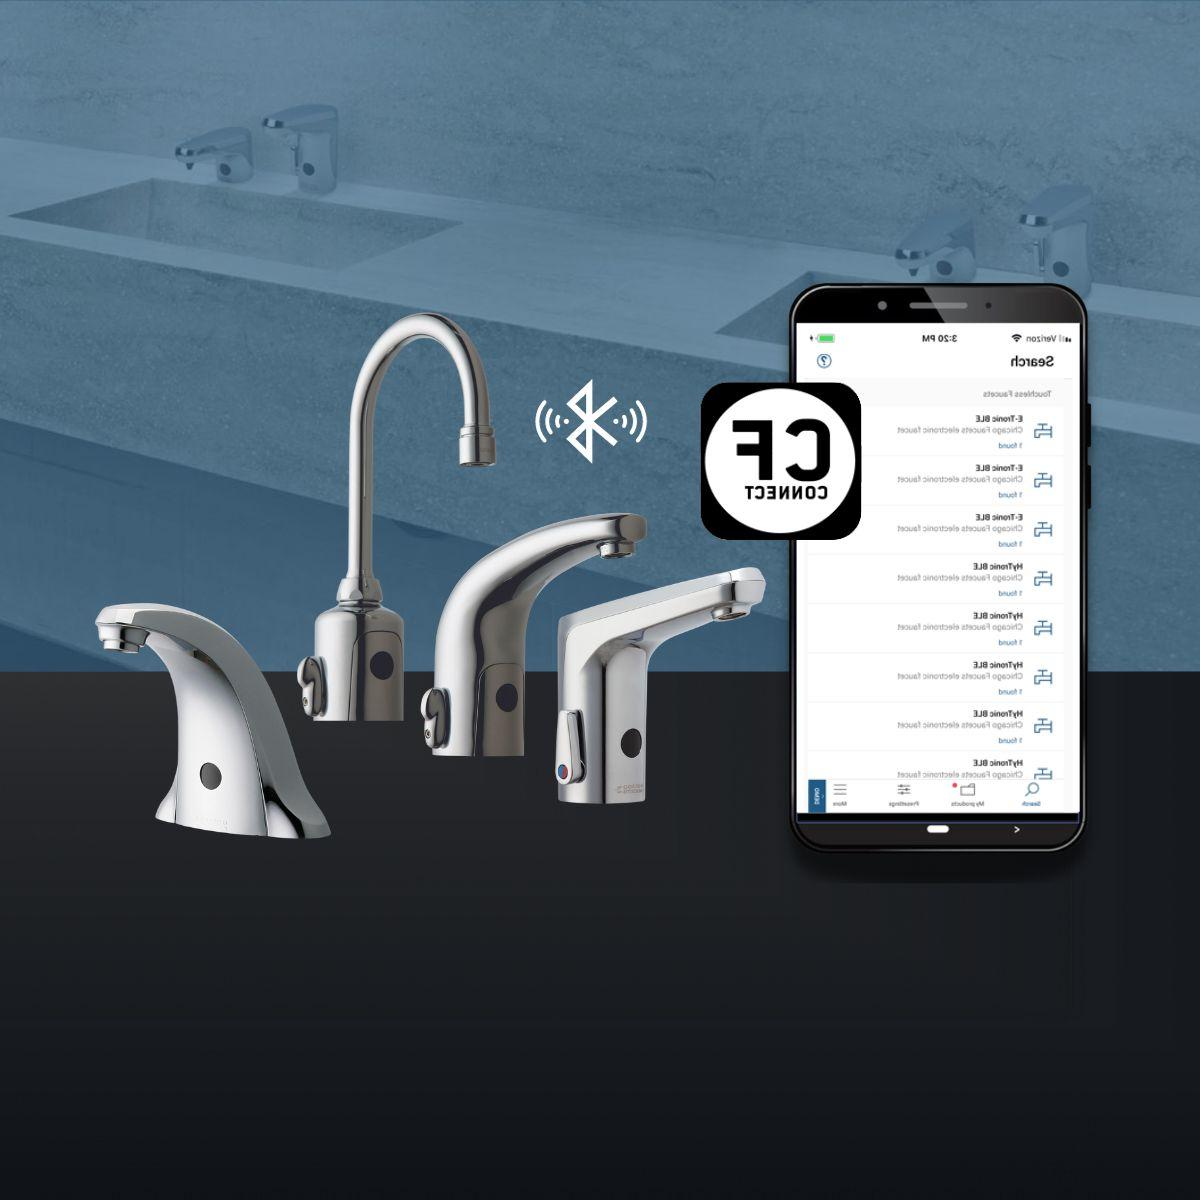 phone app next to four touchless faucets